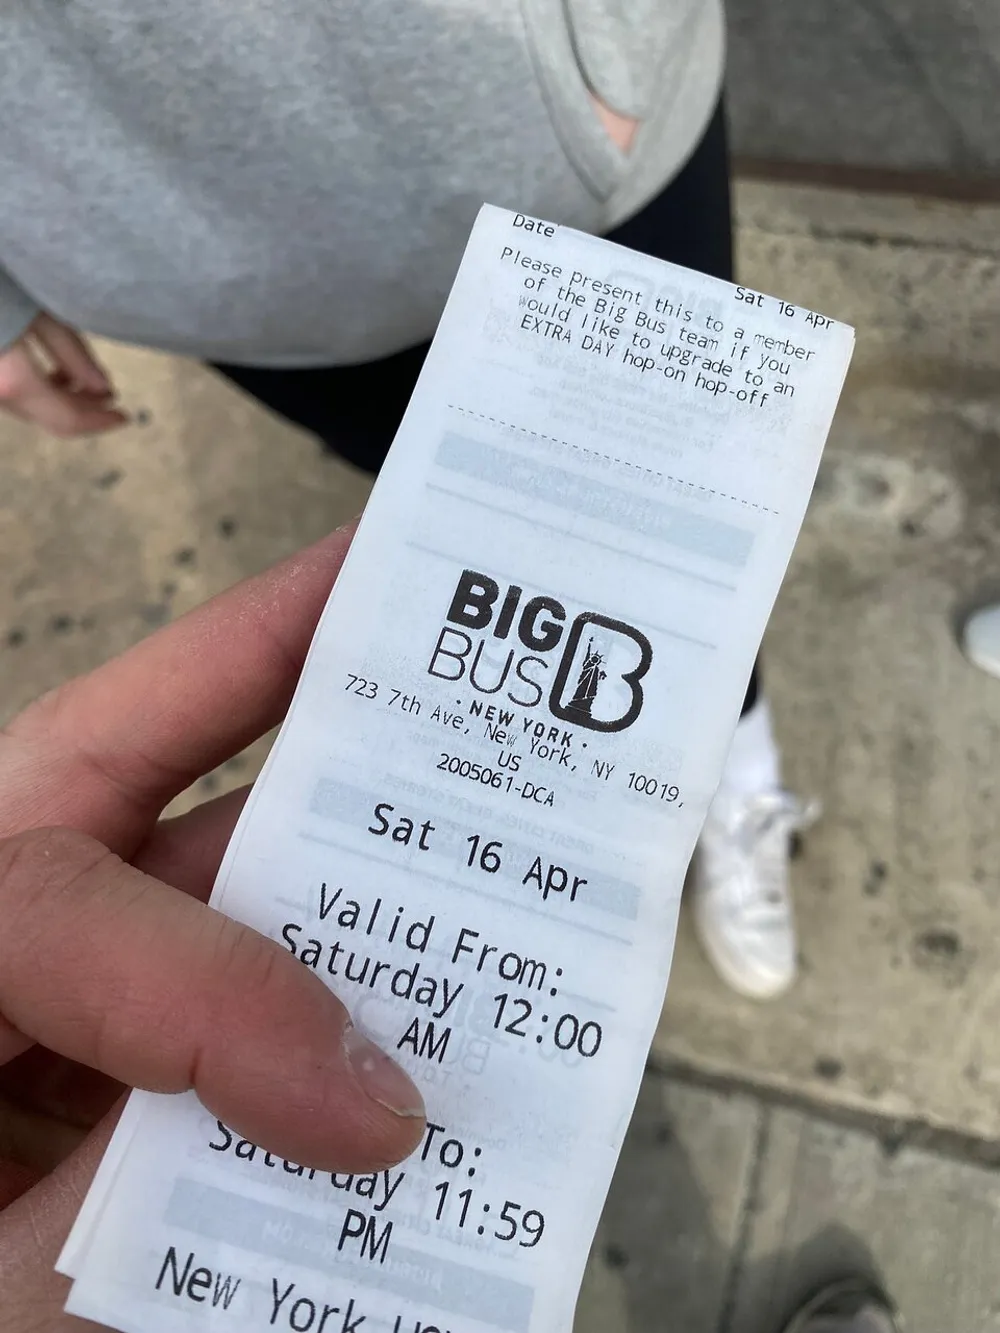 A person is holding a Big Bus New York hop-on hop-off bus tour ticket with the date and valid time period clearly visible